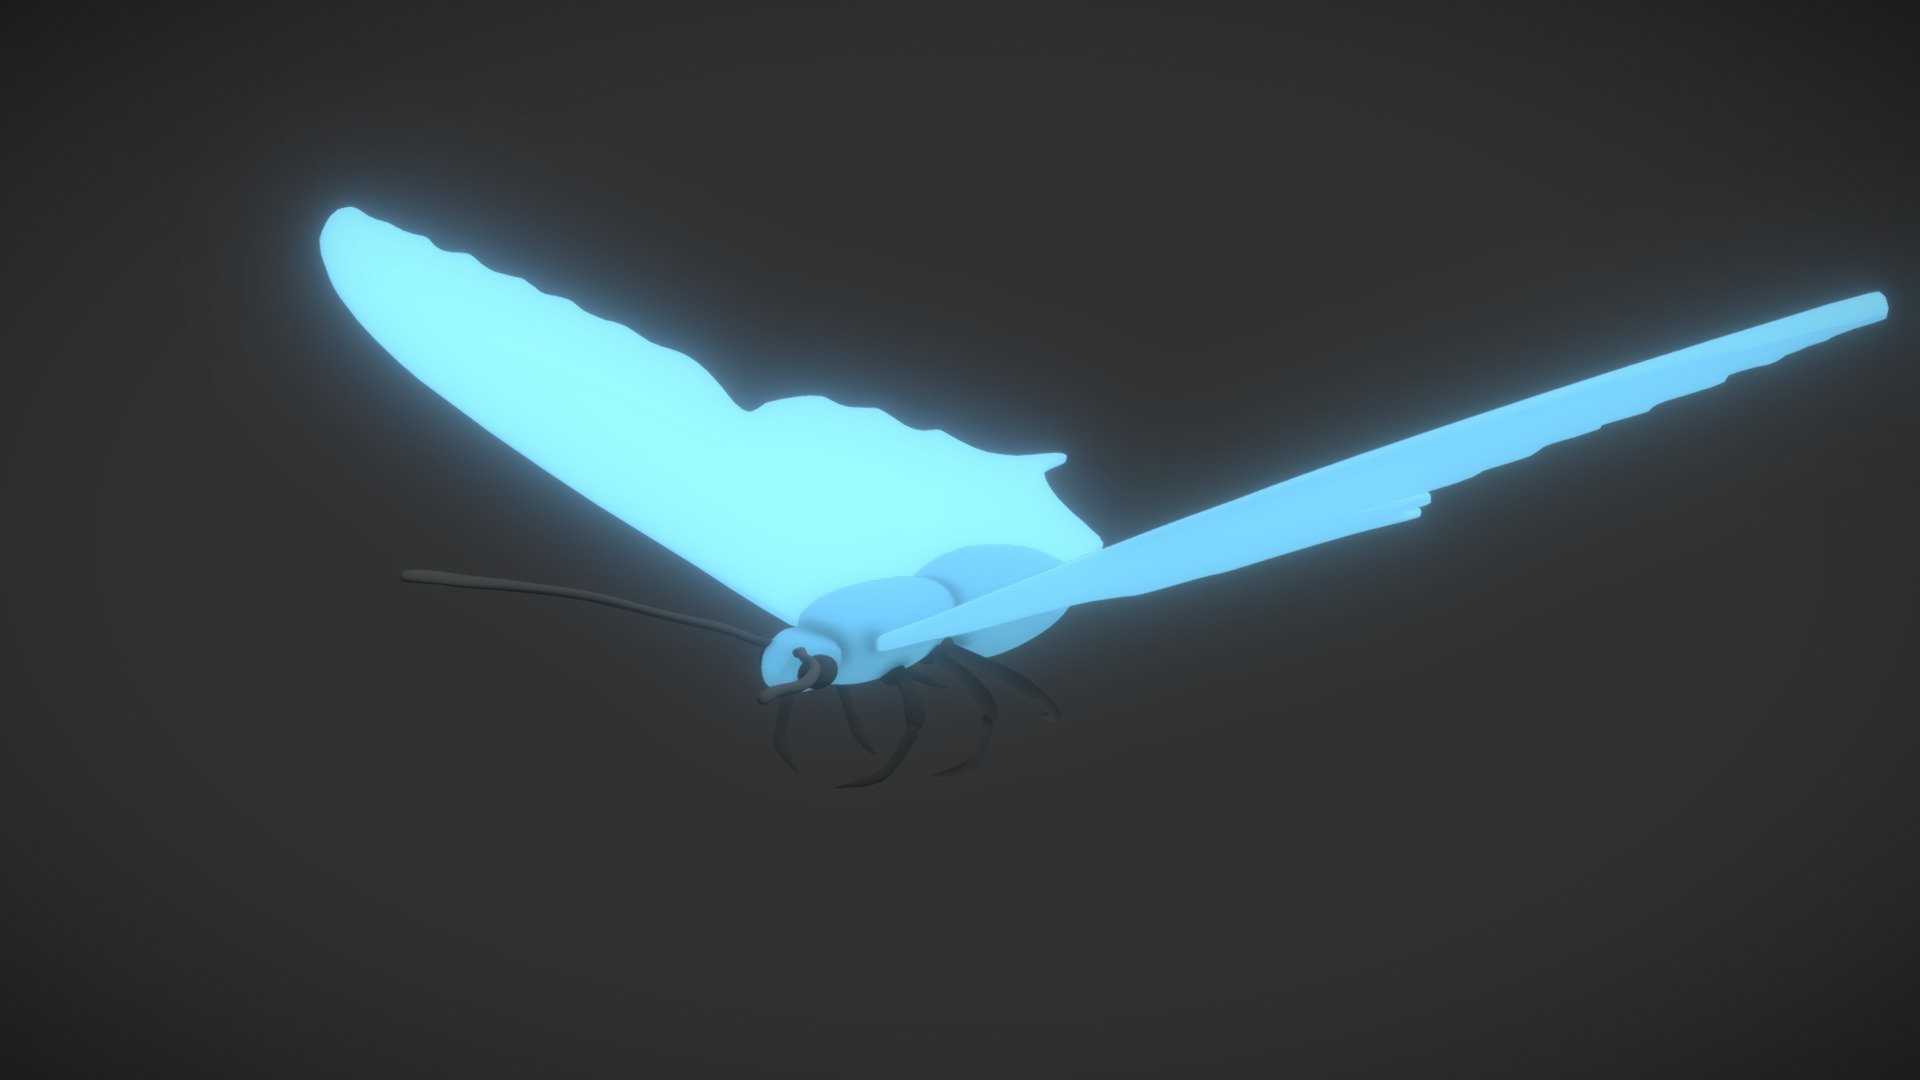 Practicing animations a bit.

New butterfly : https://sketchfab.com/3d-models/night-sky-butterfly-practice-568cddd1742b4b33ba8c6df2f12c51cd - Cartoon Butterfly - Download Free 3D model by Dylan Spin (@DylanSpin) 3d model